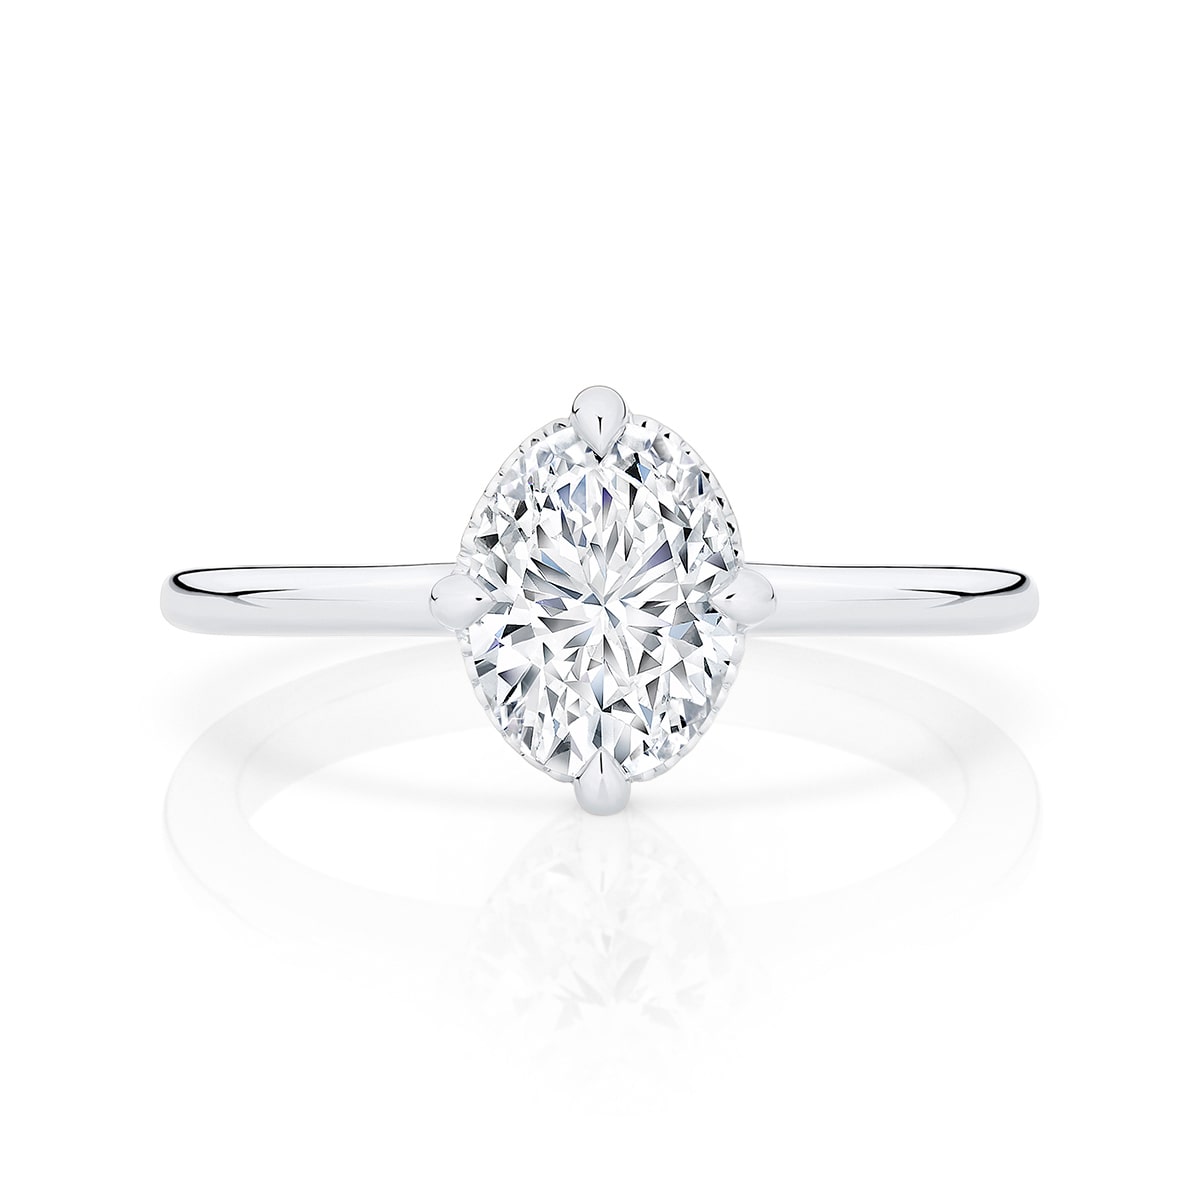 Oval Diamond Solitaire Ring in White Gold | Meridian